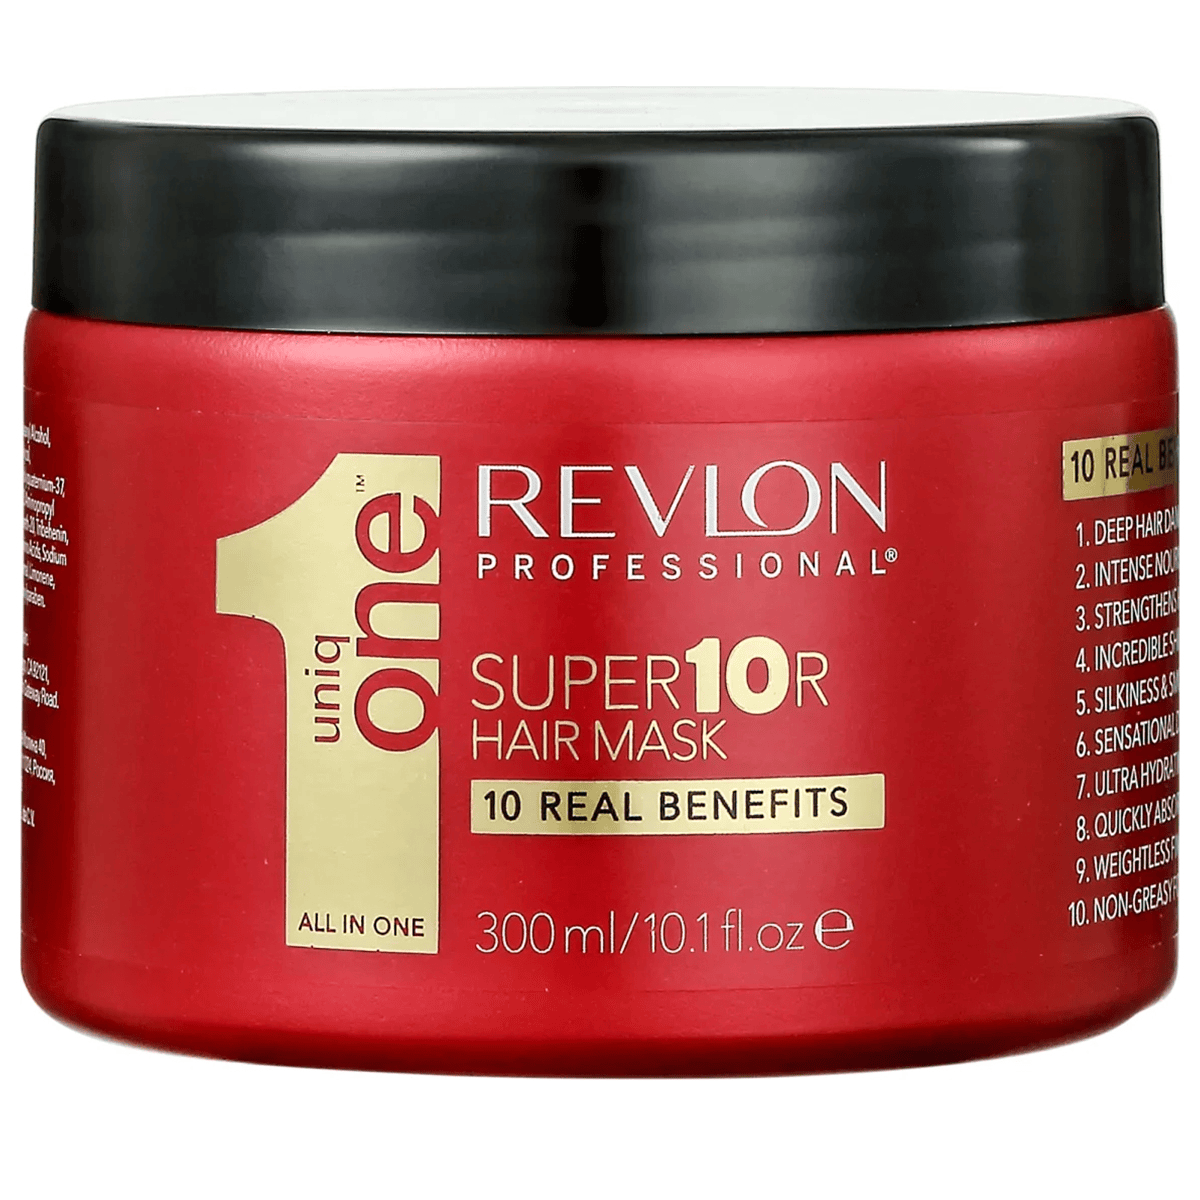 Professional One All Revlon • Mask Hair in •